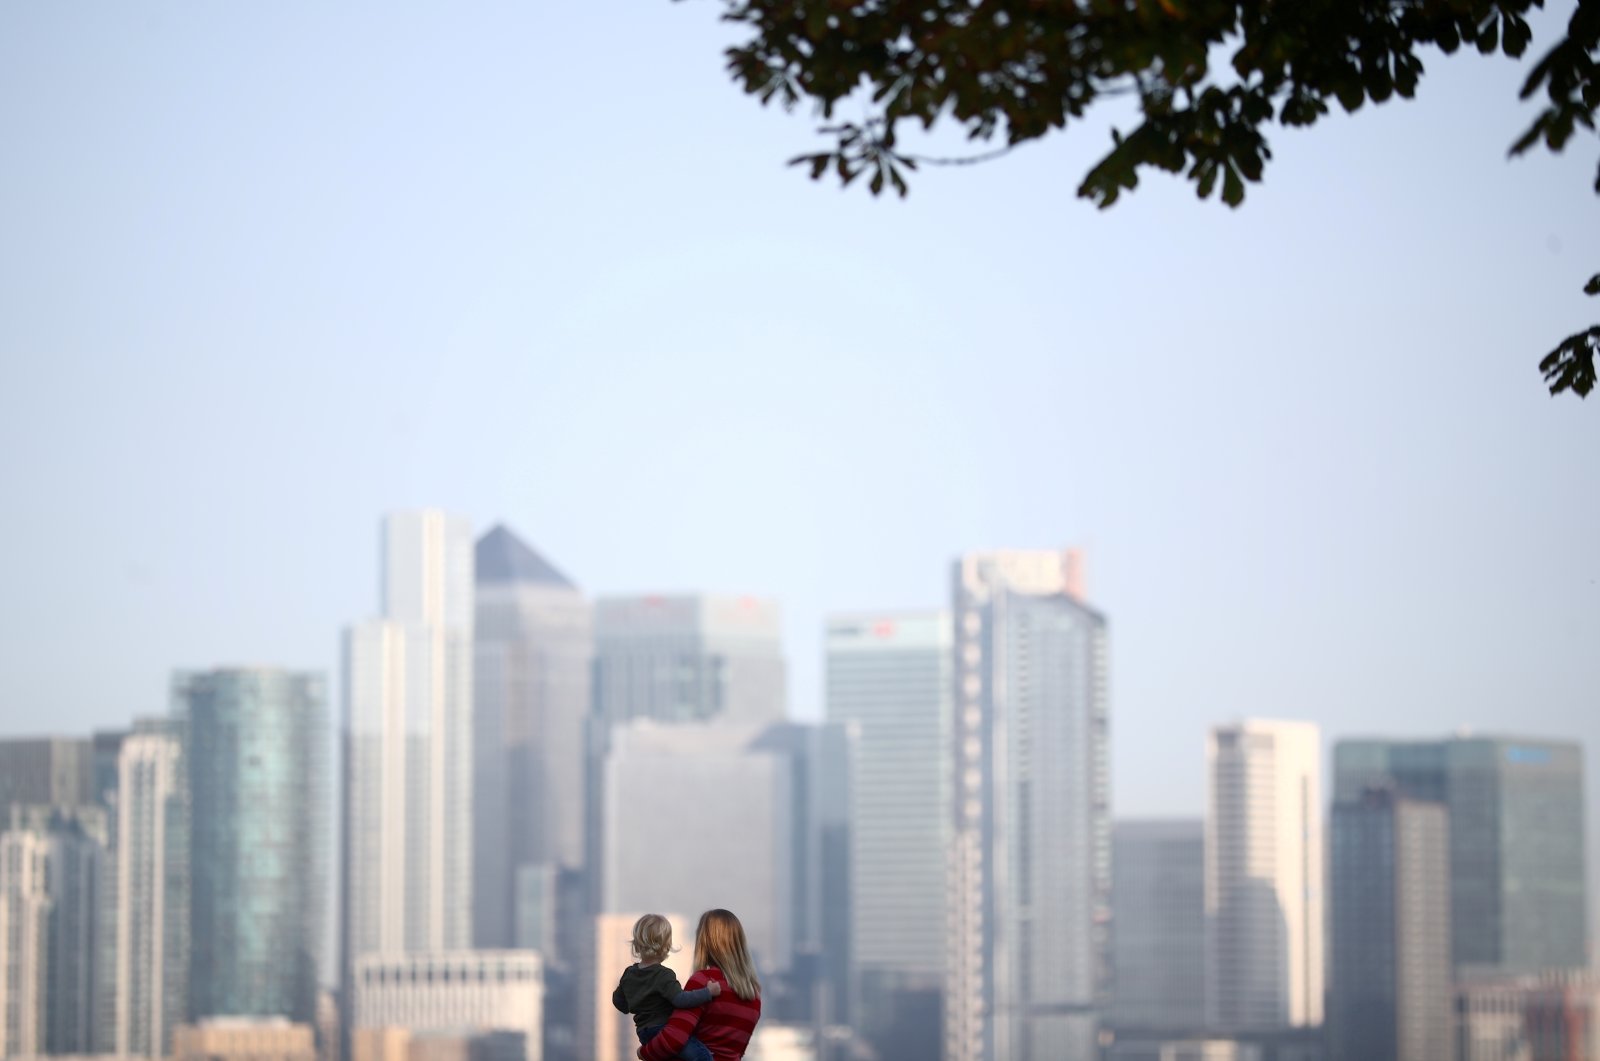 A woman holds a child in front of Canary Wharf skyline, London, U.K., Sept. 14, 2020. (Reuters Photo)